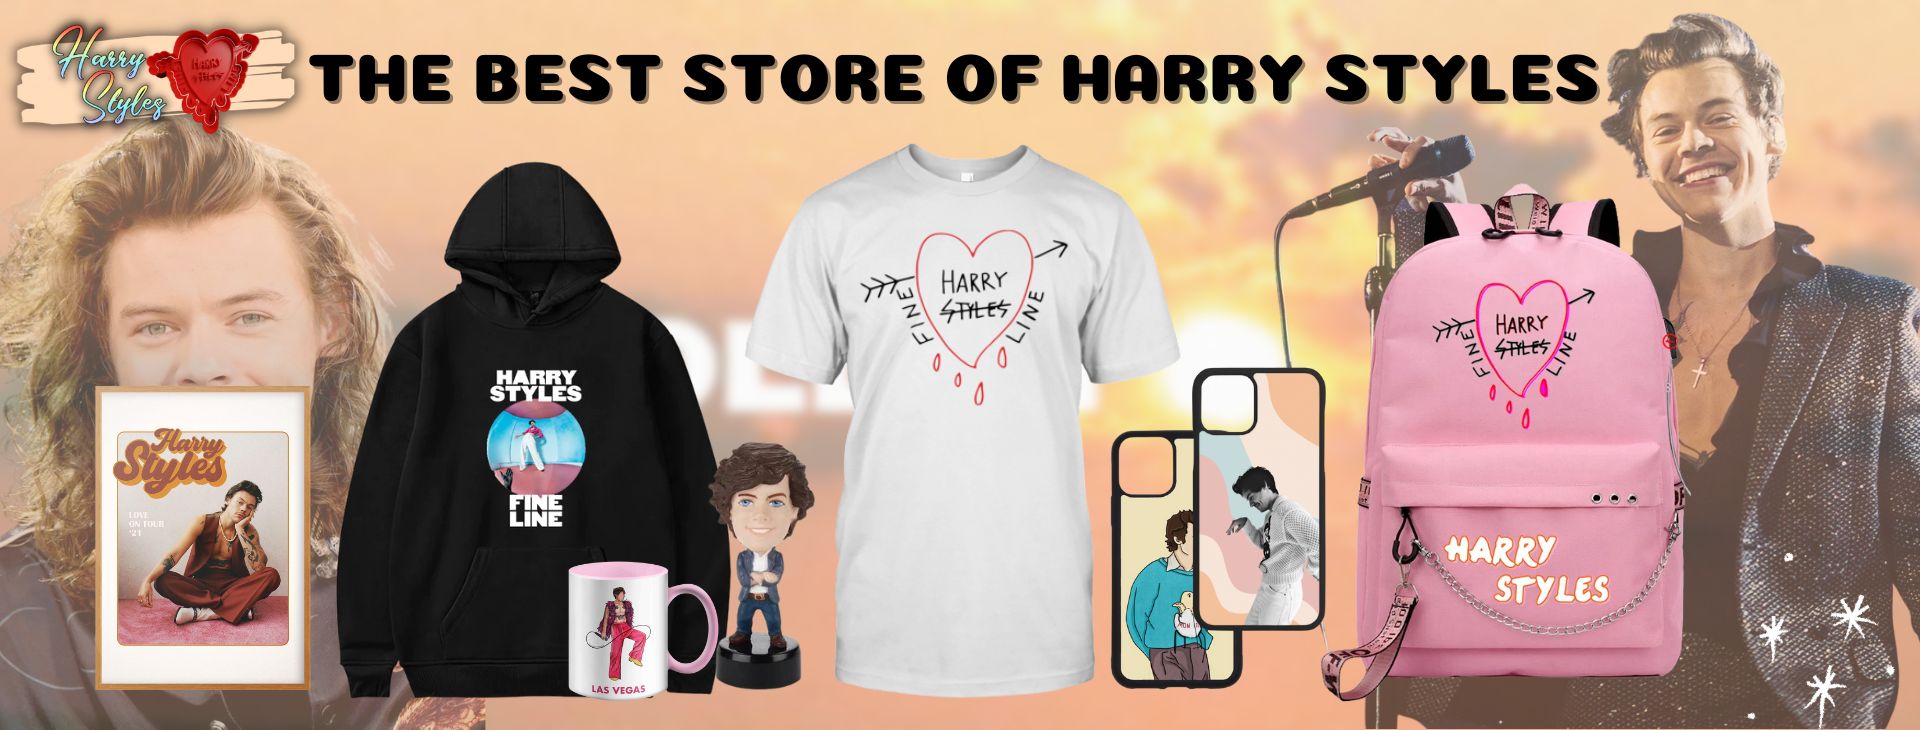 Harry Styles Banner 1920x730px 1 - Harry Styles Store